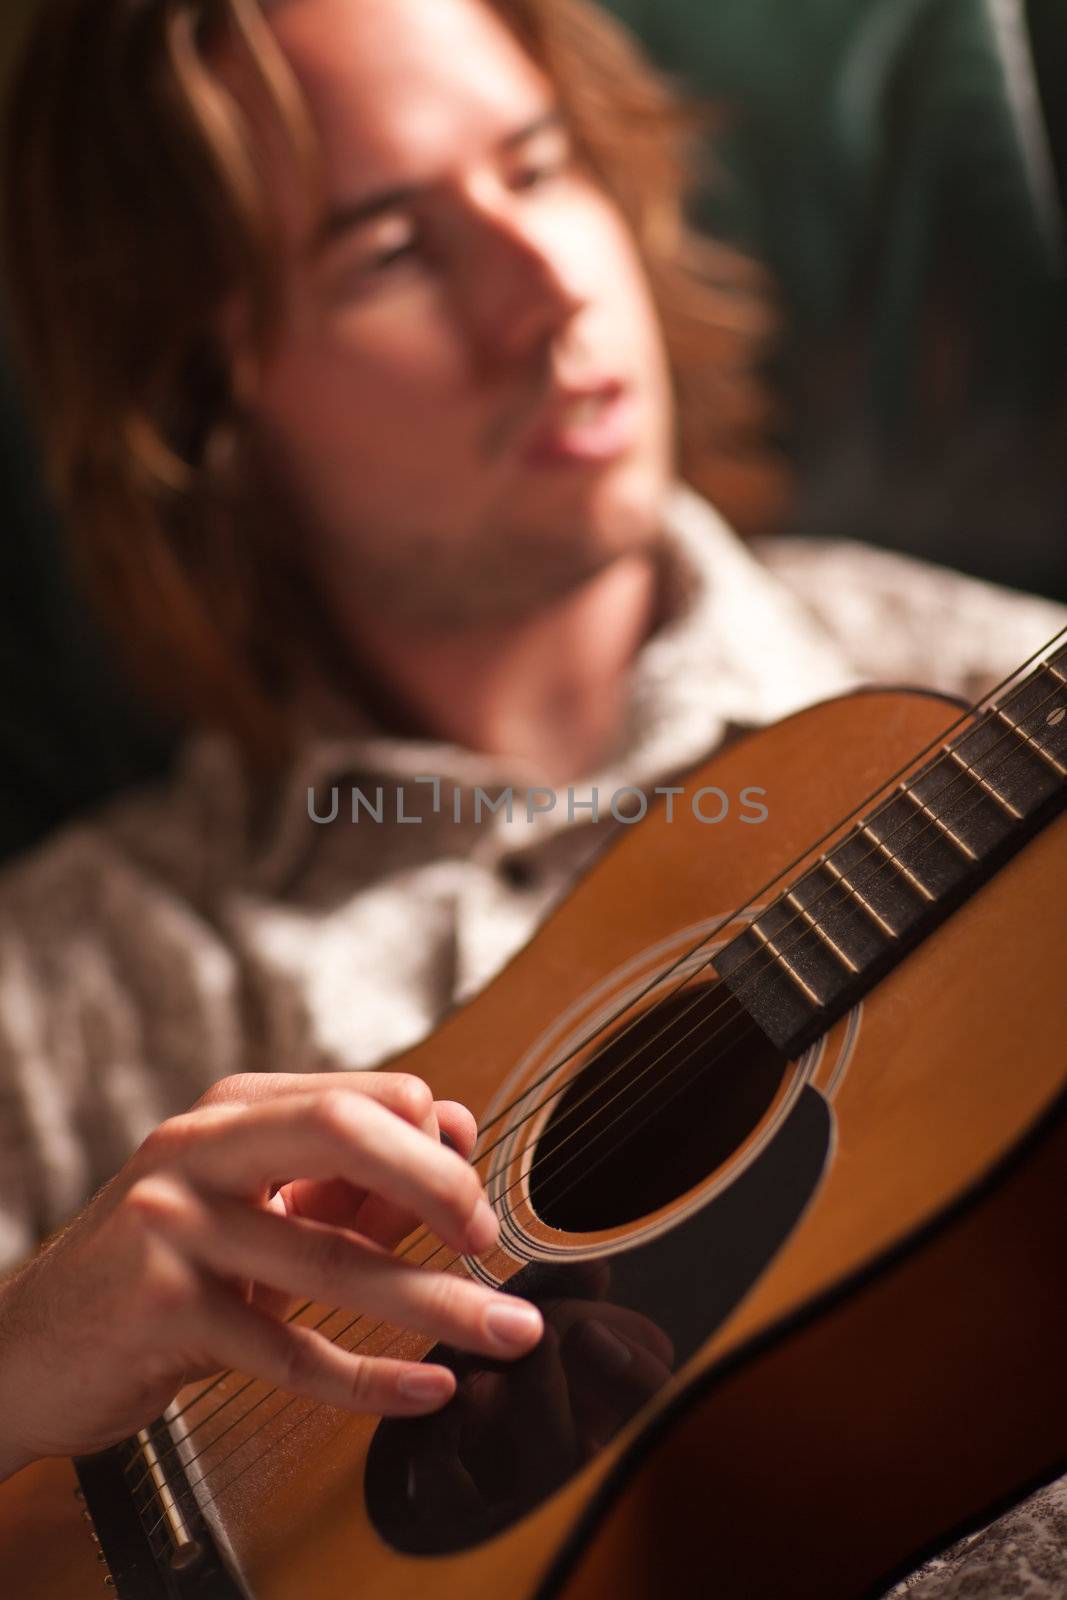 Young Musician Plays His Acoustic Guitar under Dramatic Lighting.